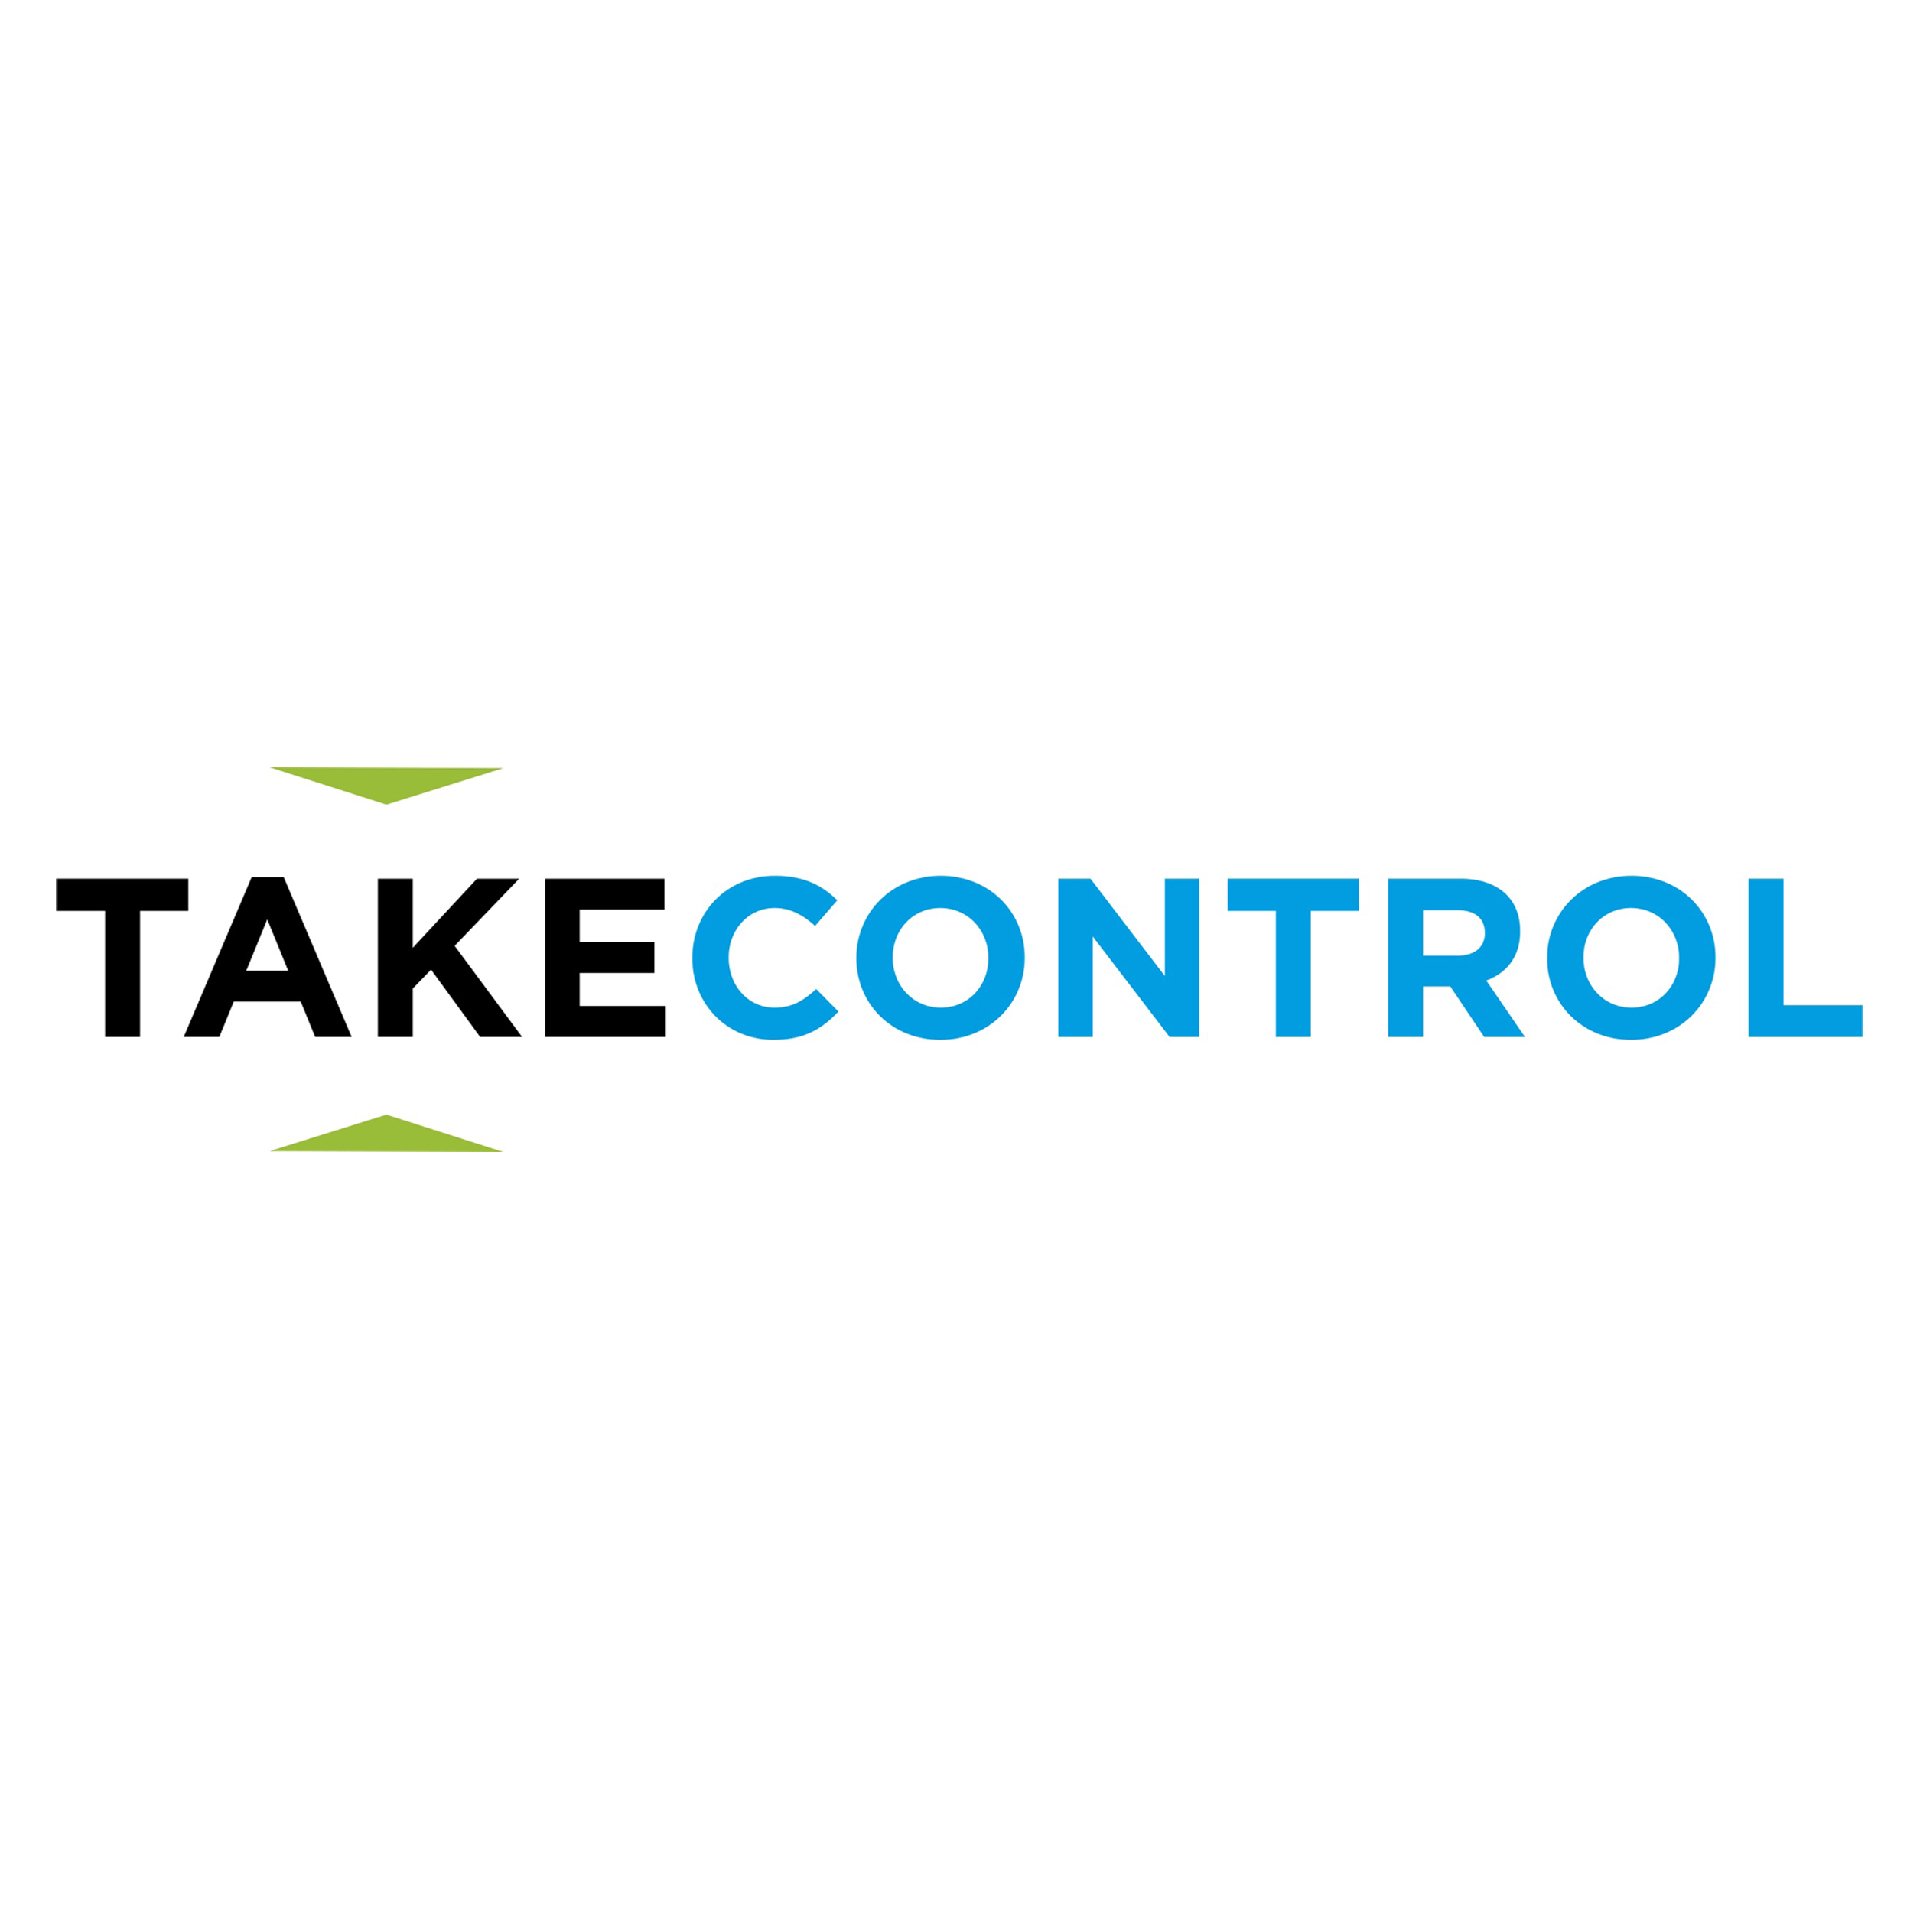 #AdvionTakeControl helps people whose lives are affected by ants and cockroaches to find the best solution to restore life uninterrupted.